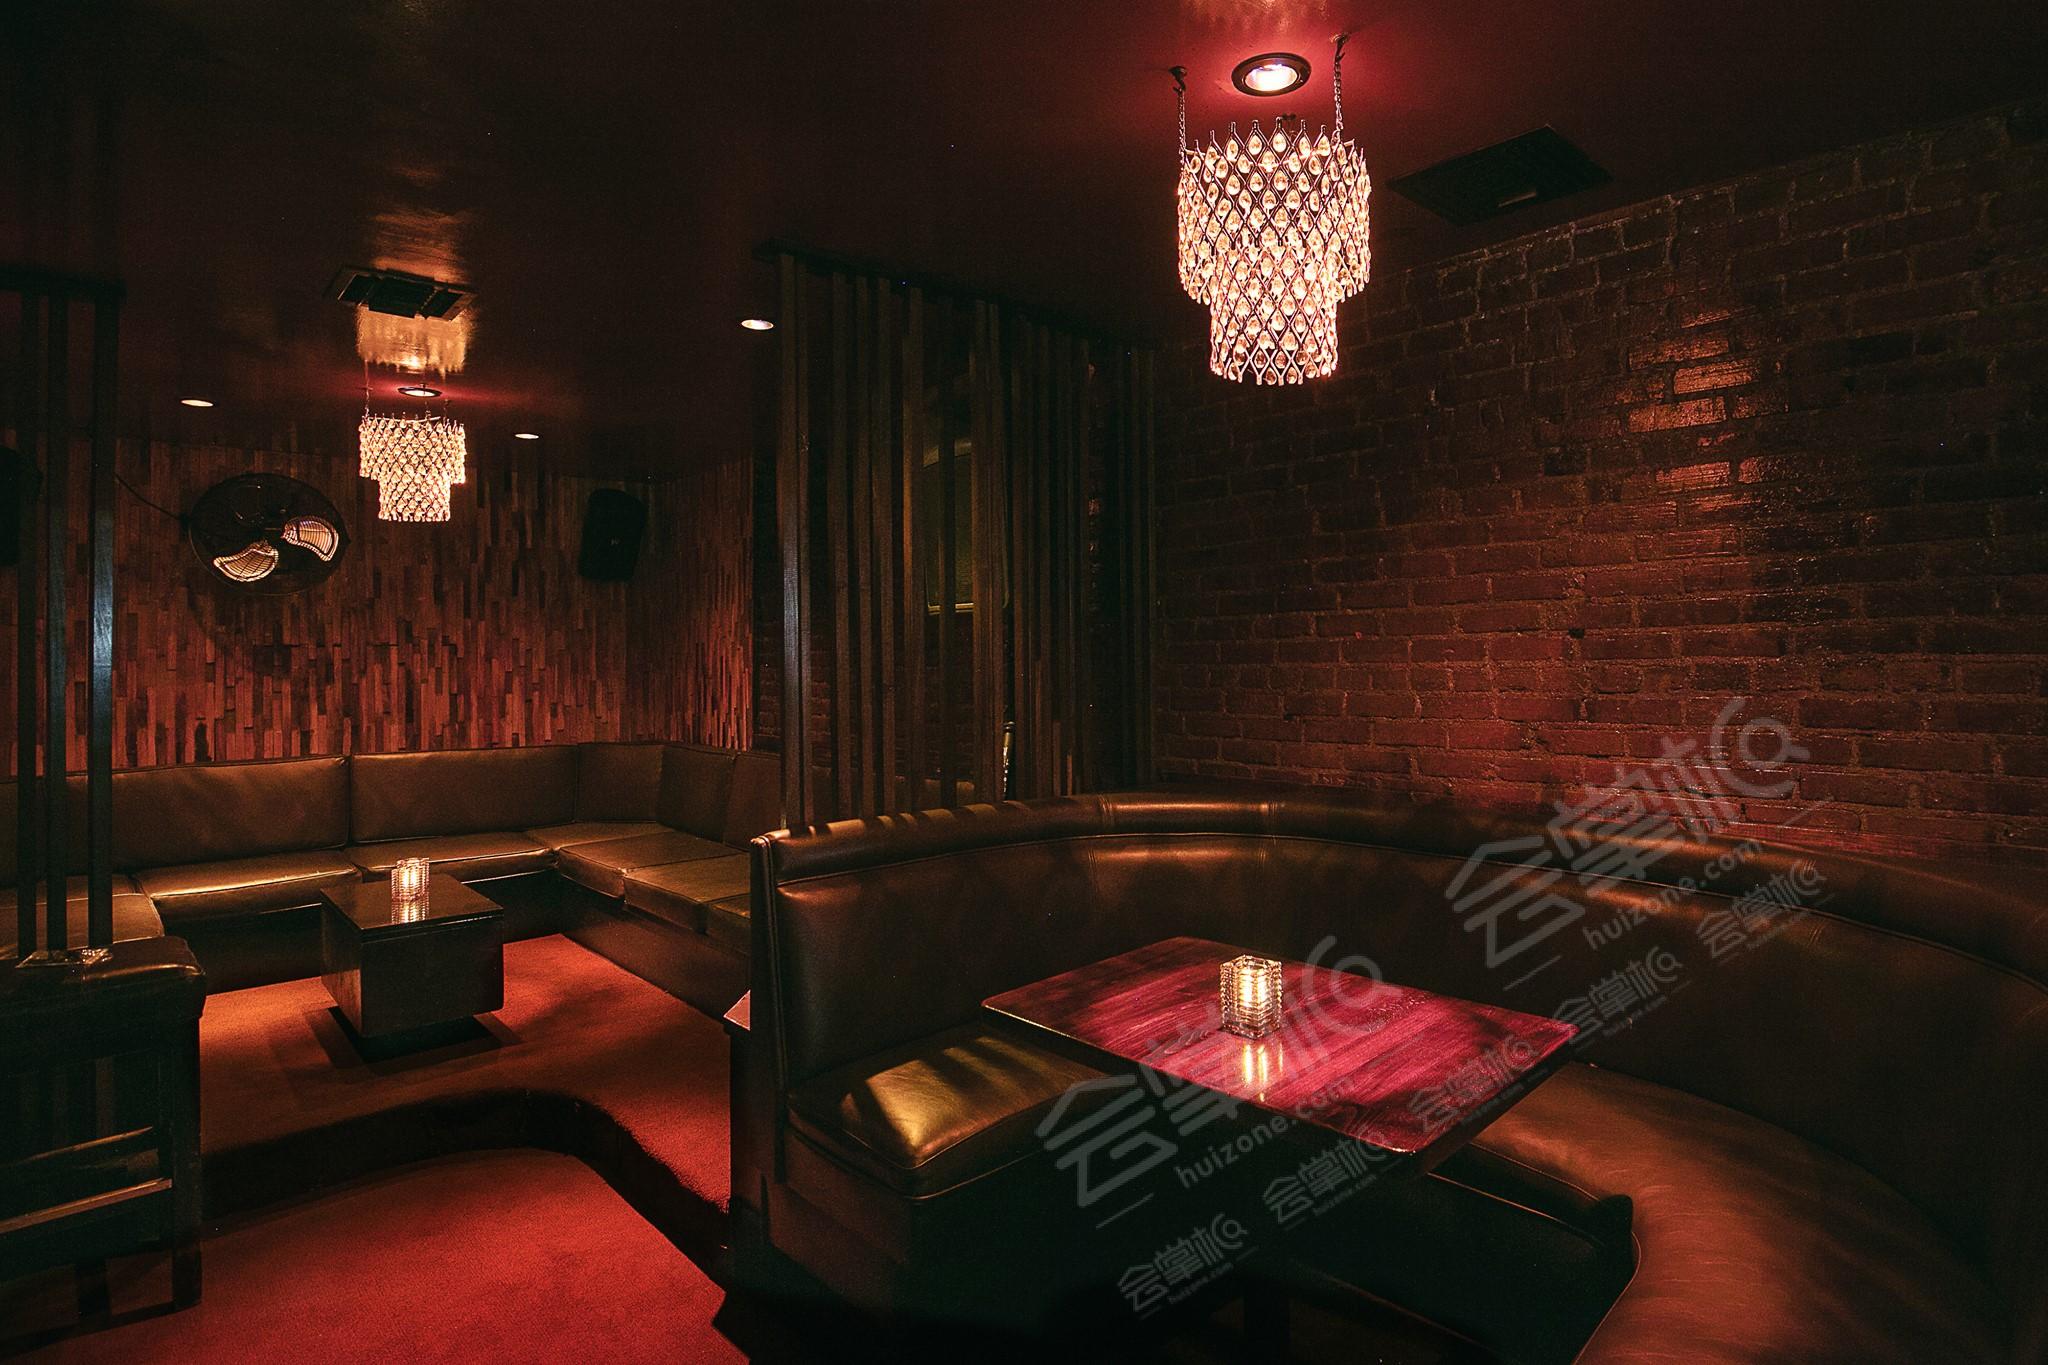 Rat Pack- Era Speakeasy Lounge & Cocktail Bar in the heart of Hollywood